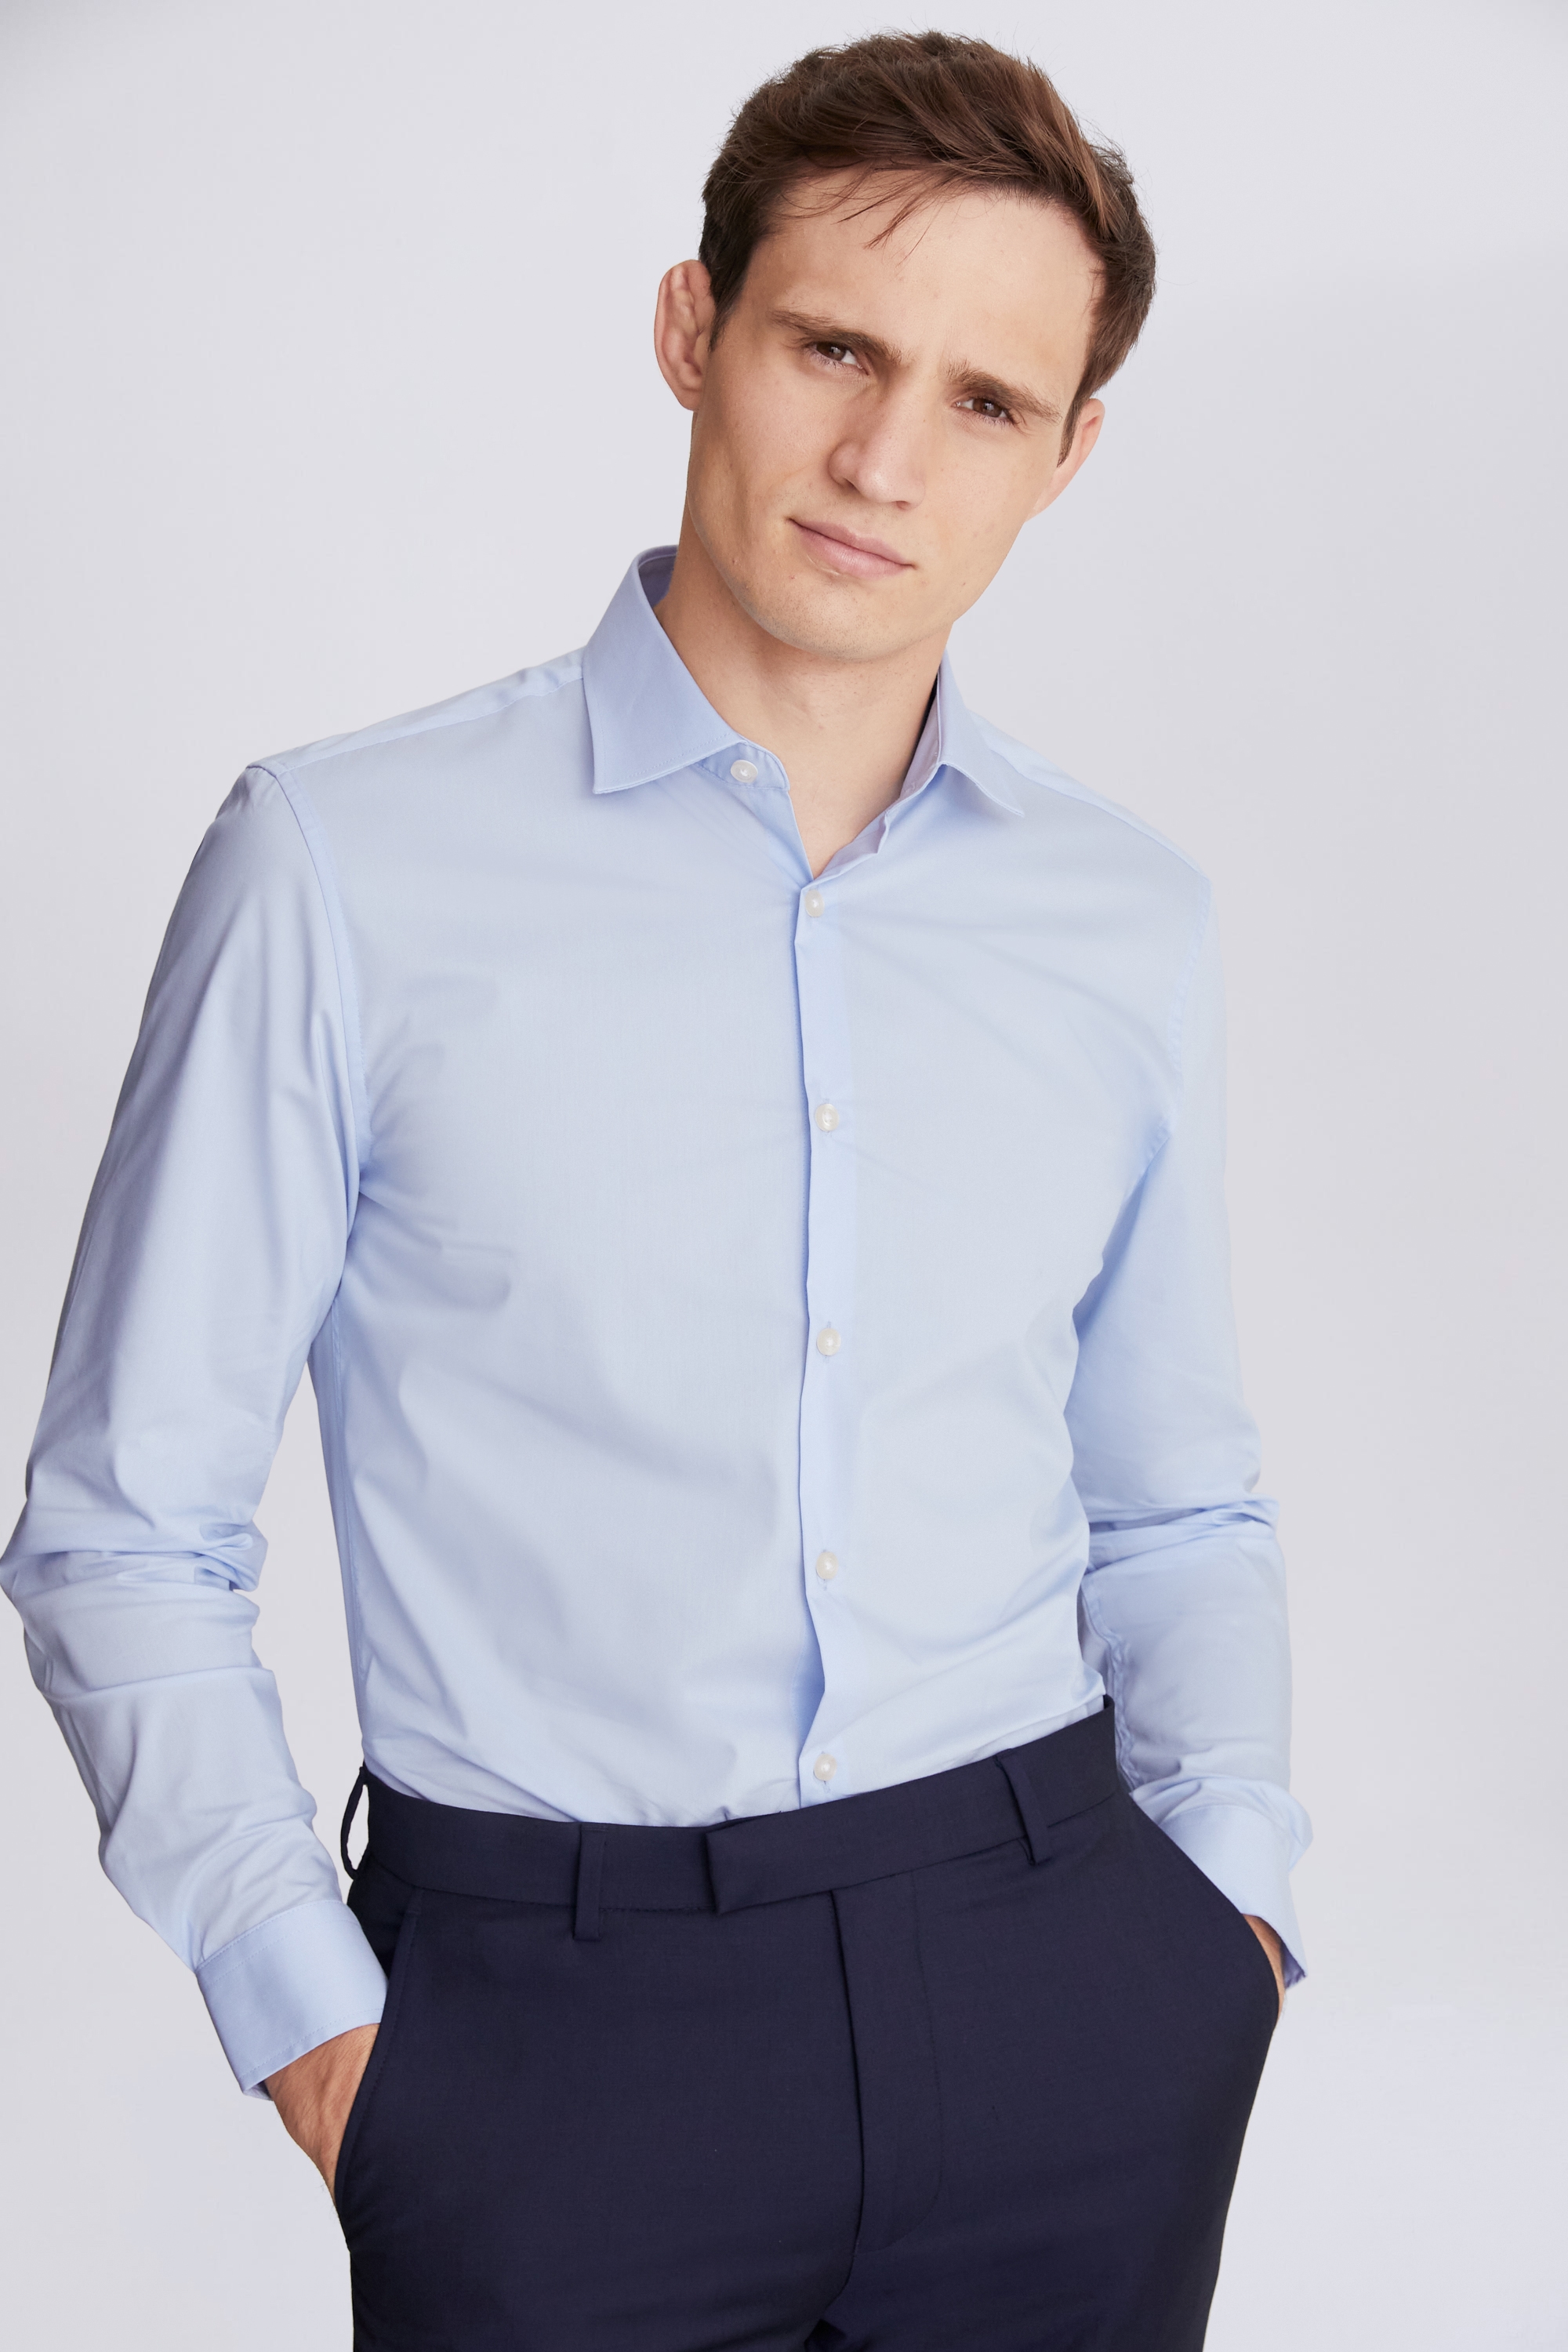 Slim Fit Sky Stretch Shirt | Buy Online at Moss